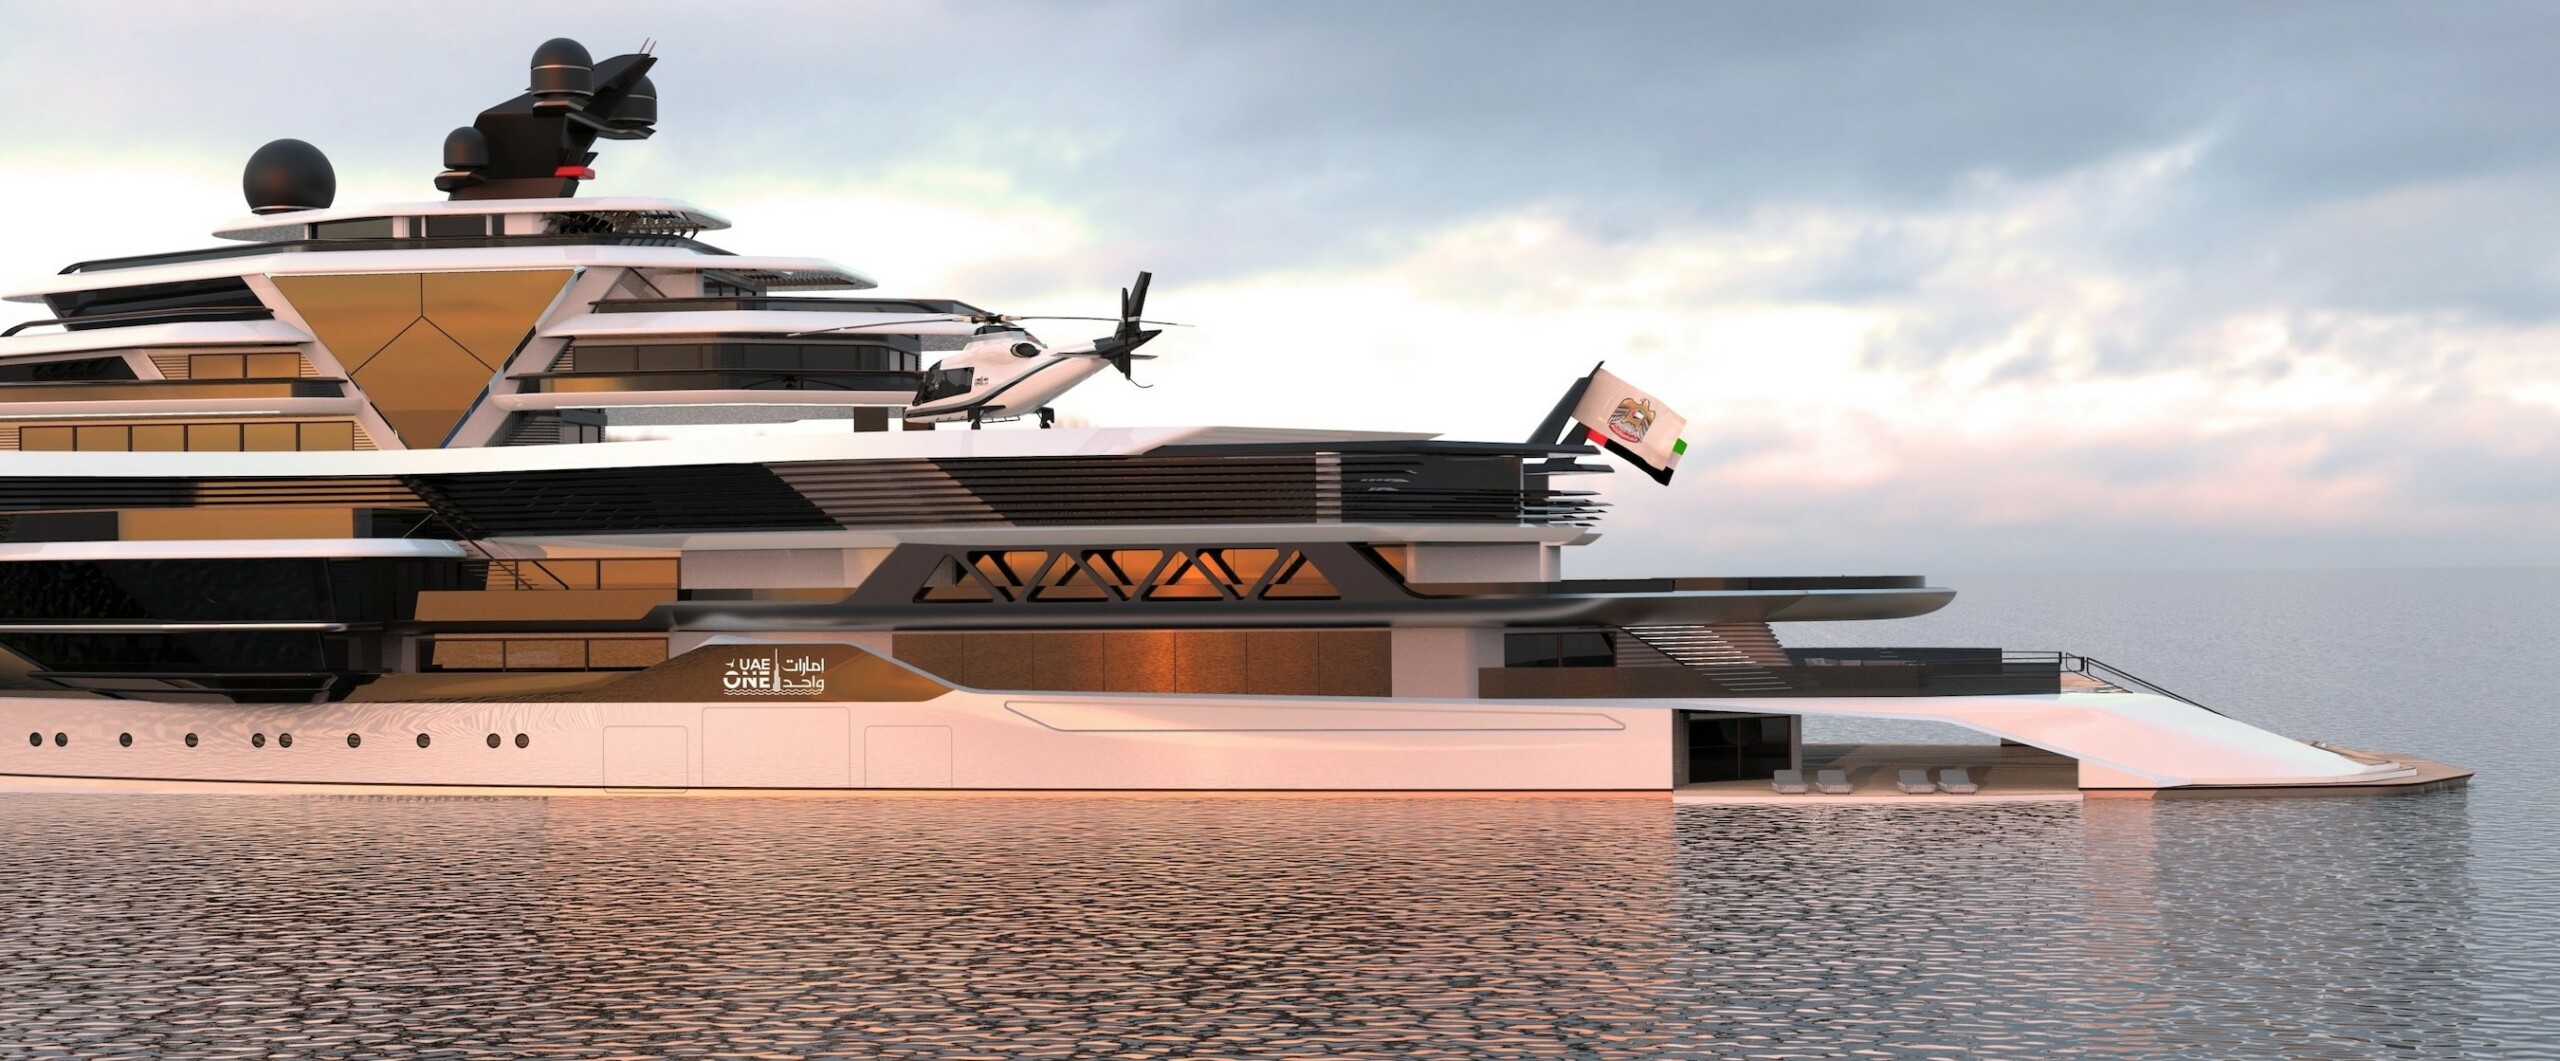 us aircraft carrier inspired uae one megayacht is so big it could be its own country 2 scaled